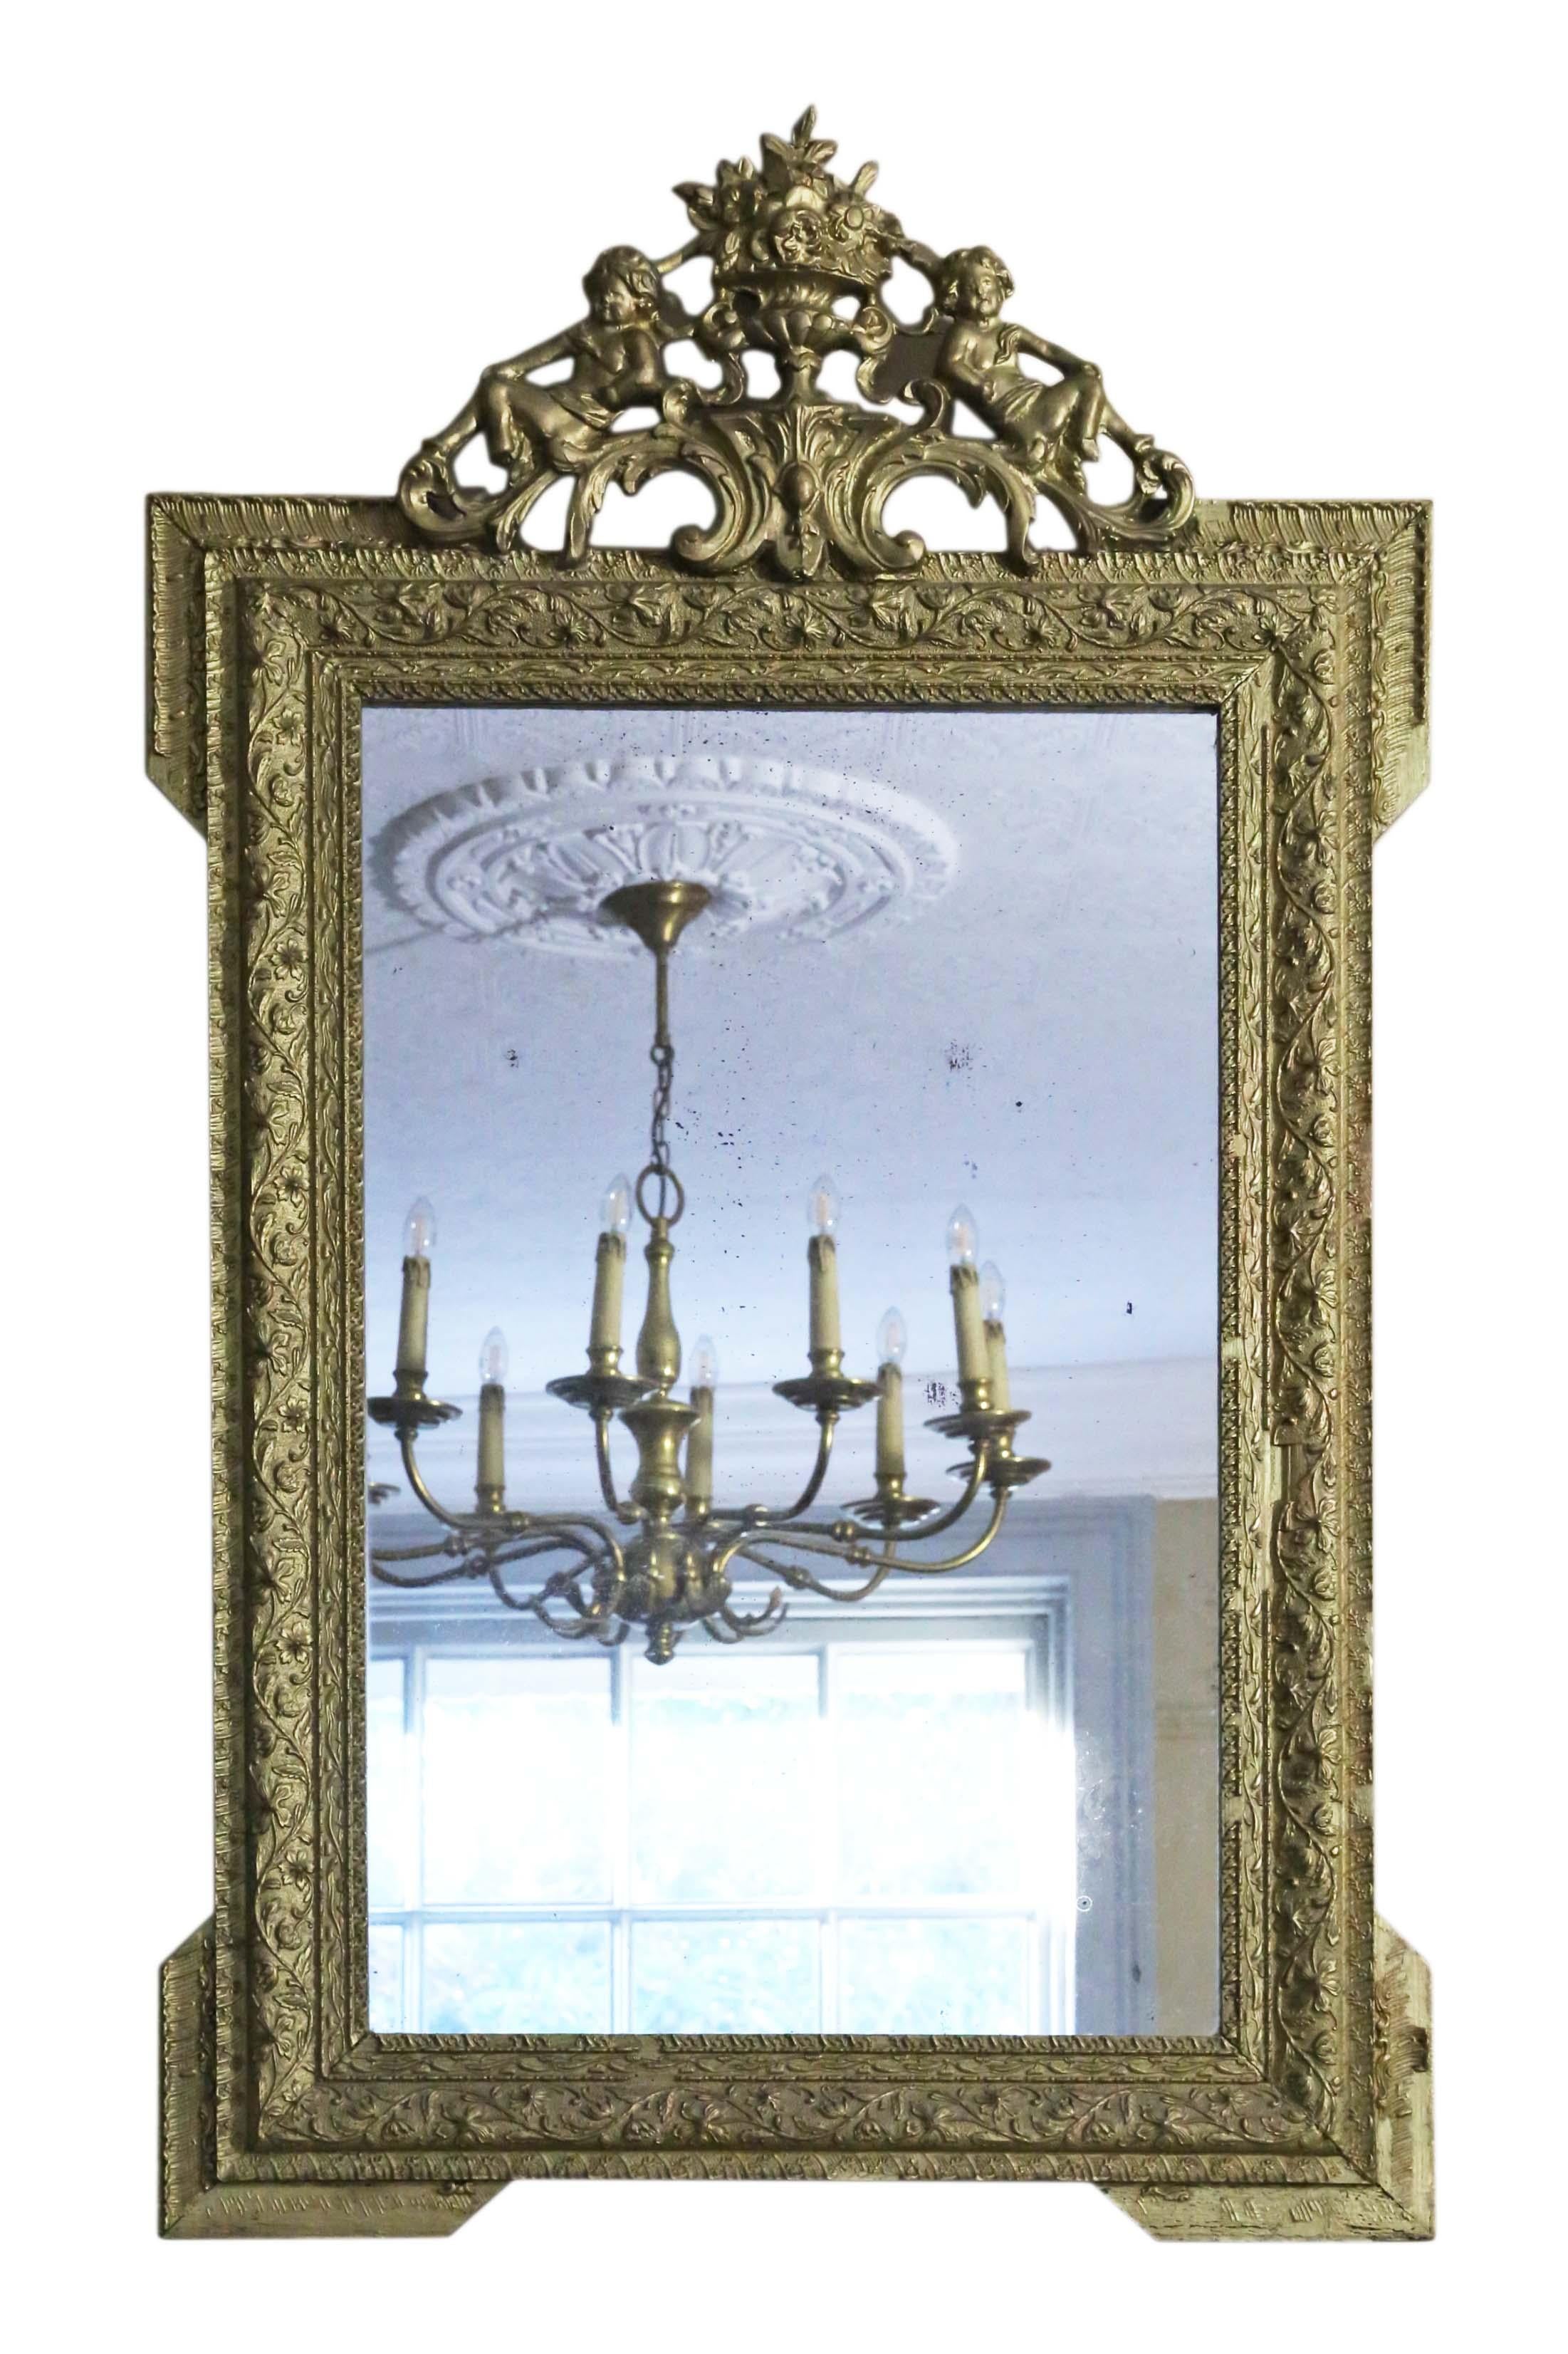 Antique 19th Century large quality gilt wall mirror or overmantle.

An impressive rare find, that would look amazing in the right location. No loose joints.

The original mirrored glass has light to medium oxidation. The frame has been